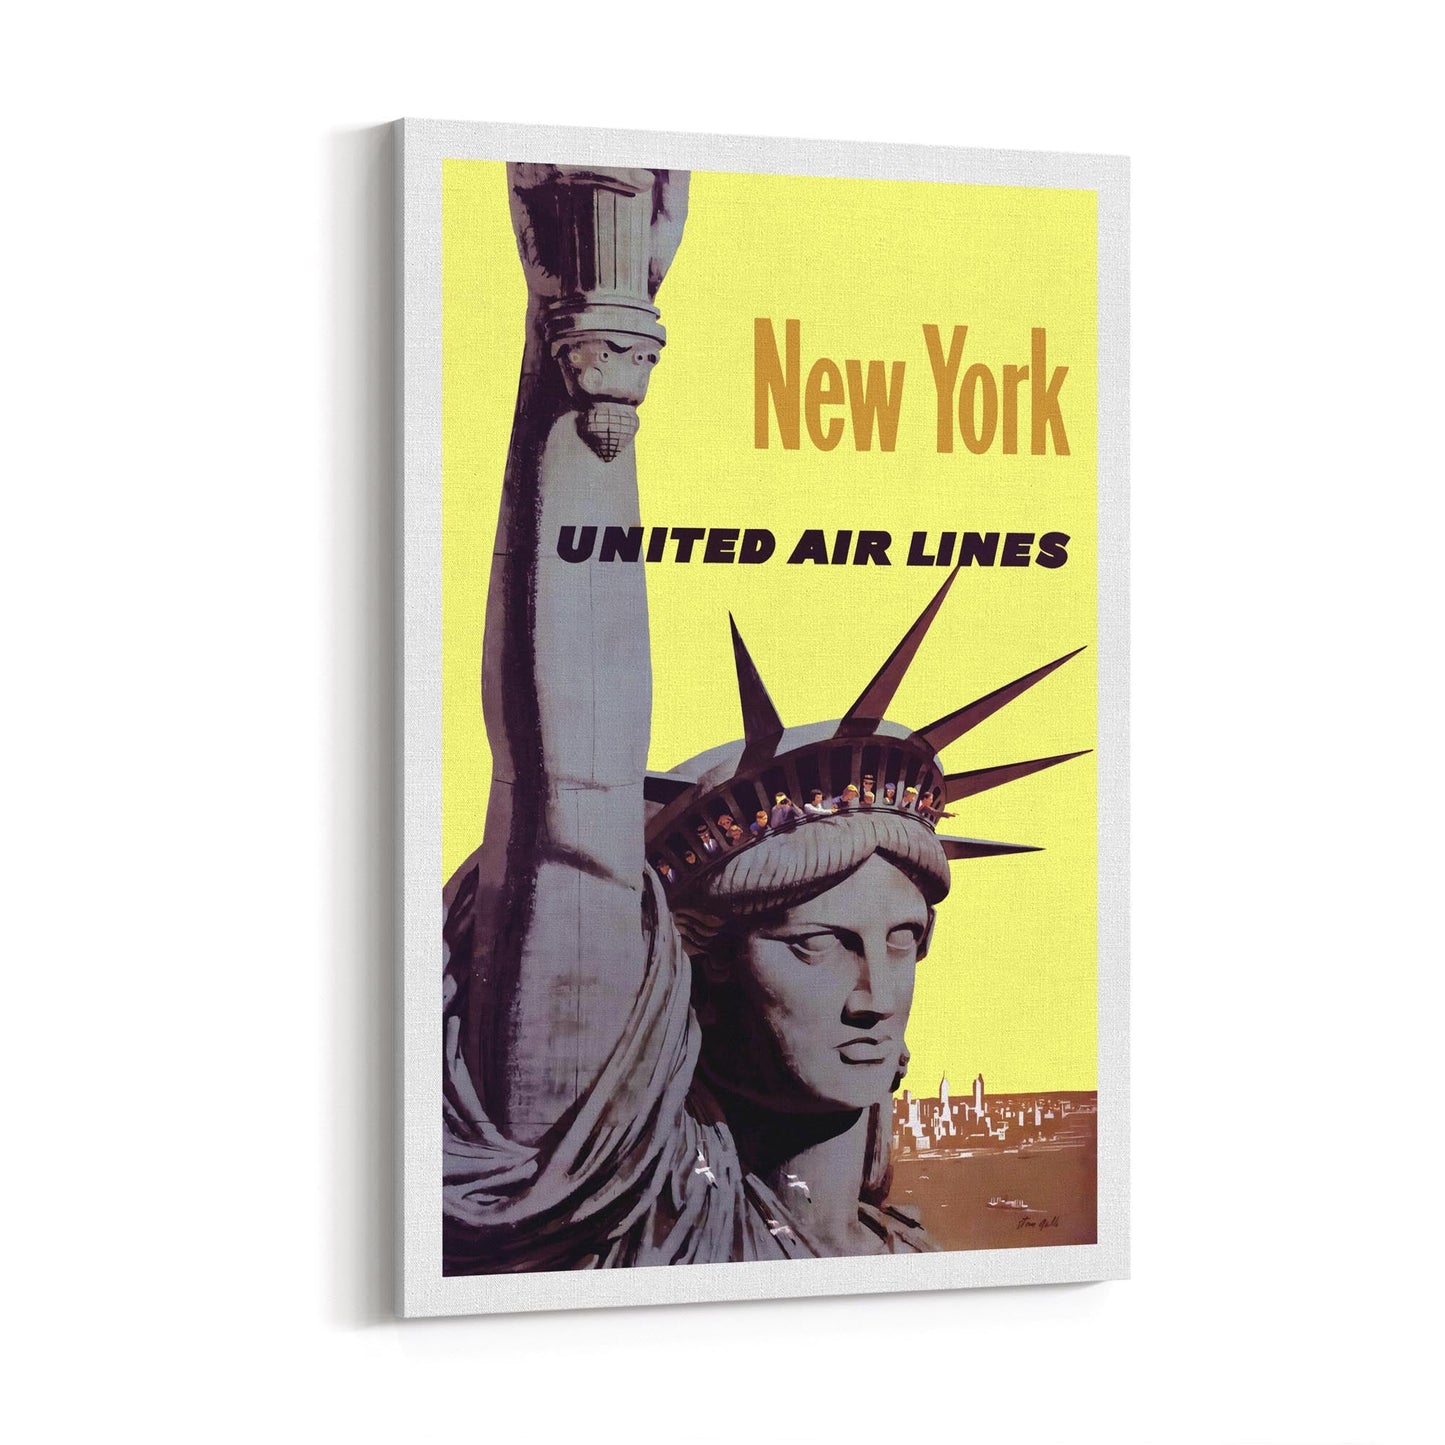 New York United Air Lines, United States of America | Framed Canvas Vintage Travel Advertisement